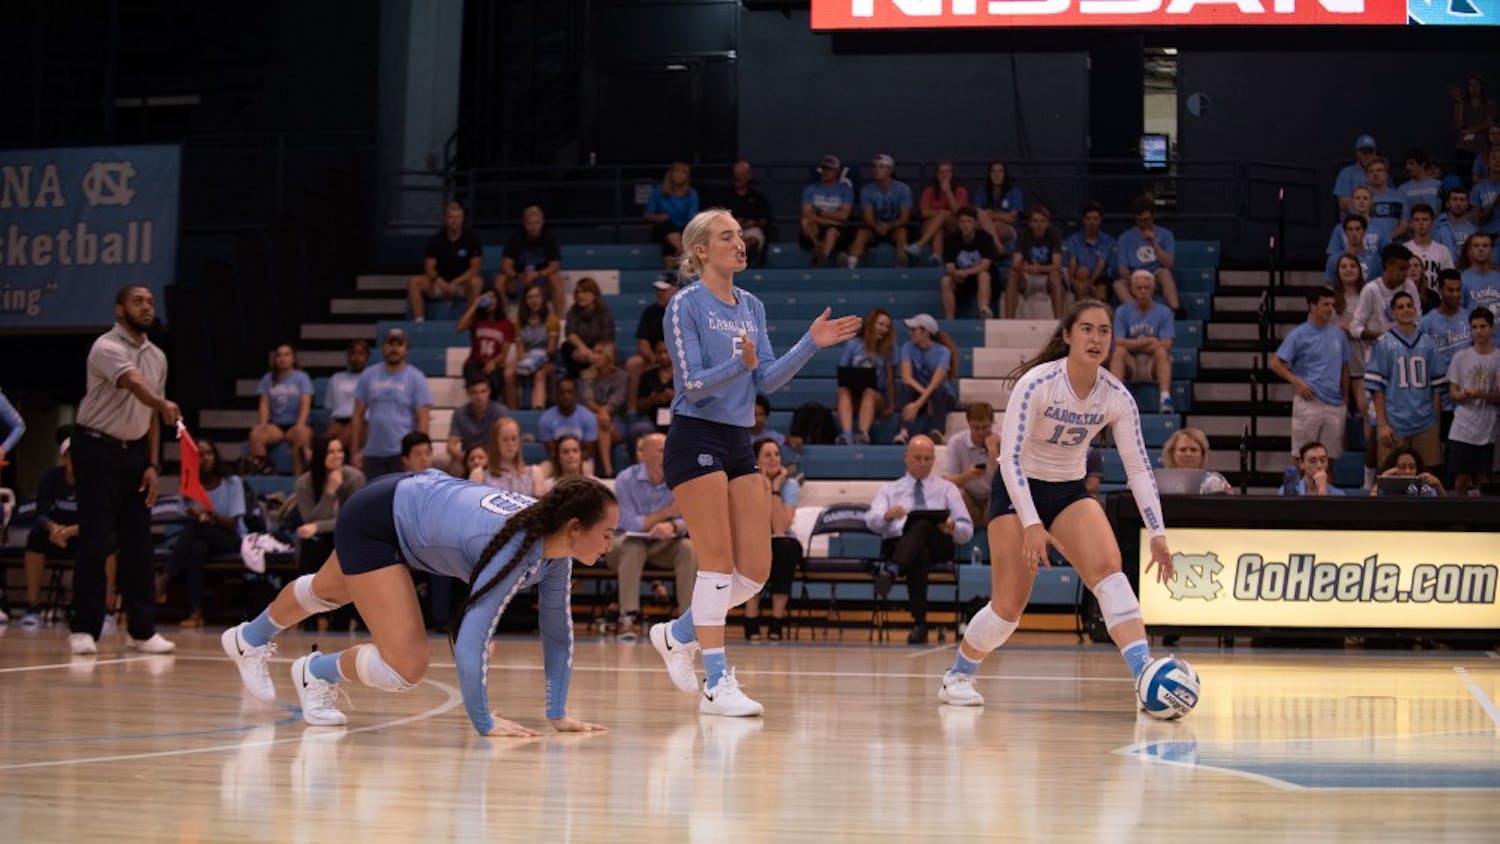 UNC volleyball players react in frustration after losing a point in a 3-1 defeat against Michigan State on Sept. 1 in Chapel Hill.